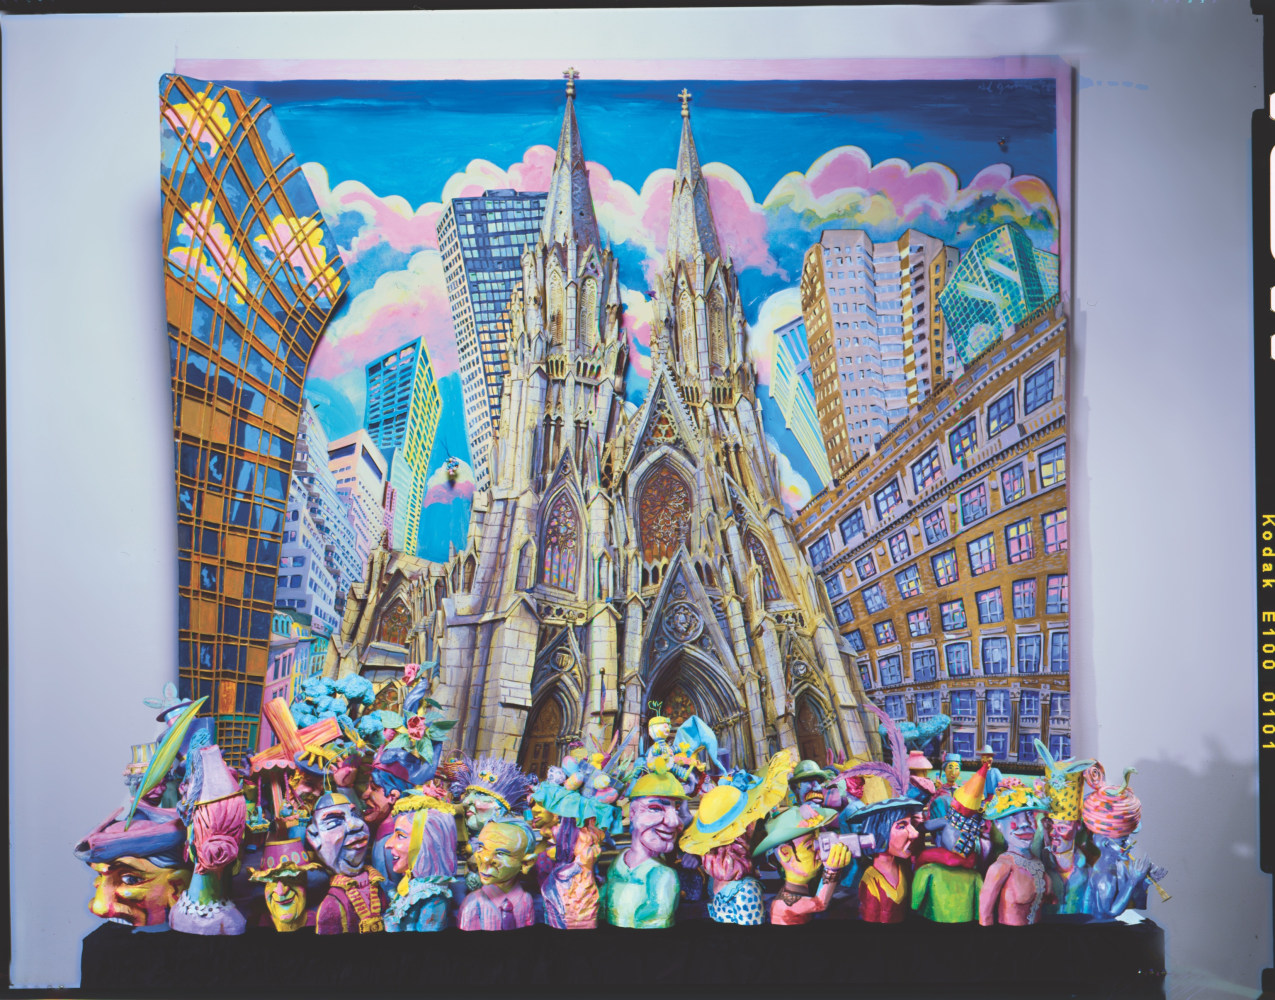 Easter Parade, 1994
acrylic on a mixed media construction
80 x 87 x 34 in. / 203.2 x 221 x 86.4&amp;nbsp;cm&amp;nbsp;